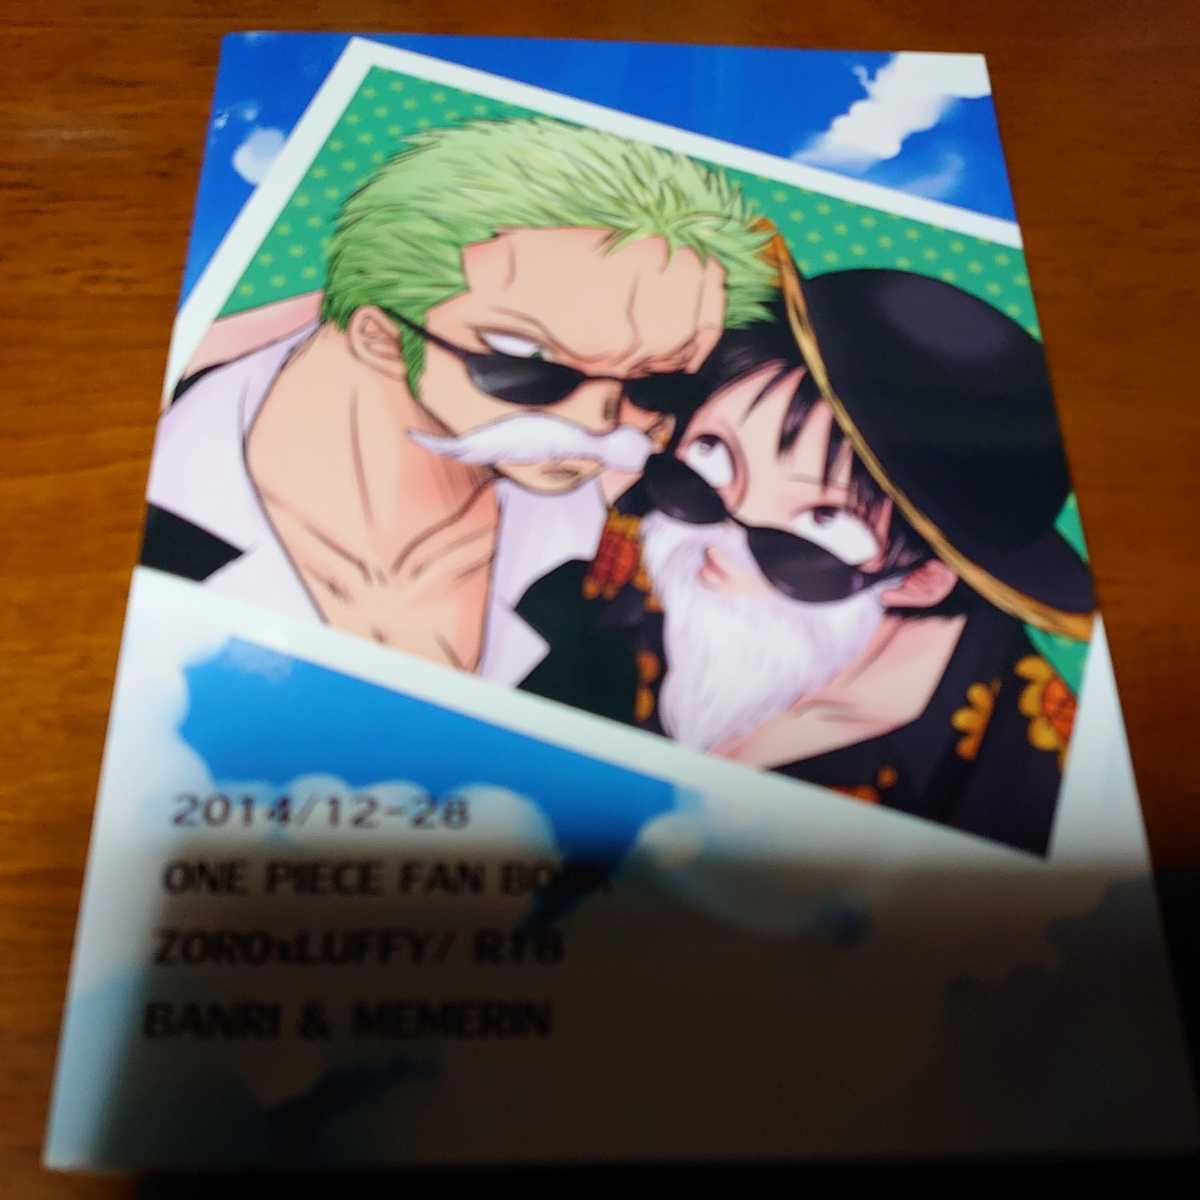 One Piece ワンピース 同人誌 The ルーキーズ めめりん様 にこいち 万里 瞳 様 Zlwv ゾロ ルフィ ゾロル 小説 Product Details Yahoo Auctions Japan Proxy Bidding And Shopping Service From Japan